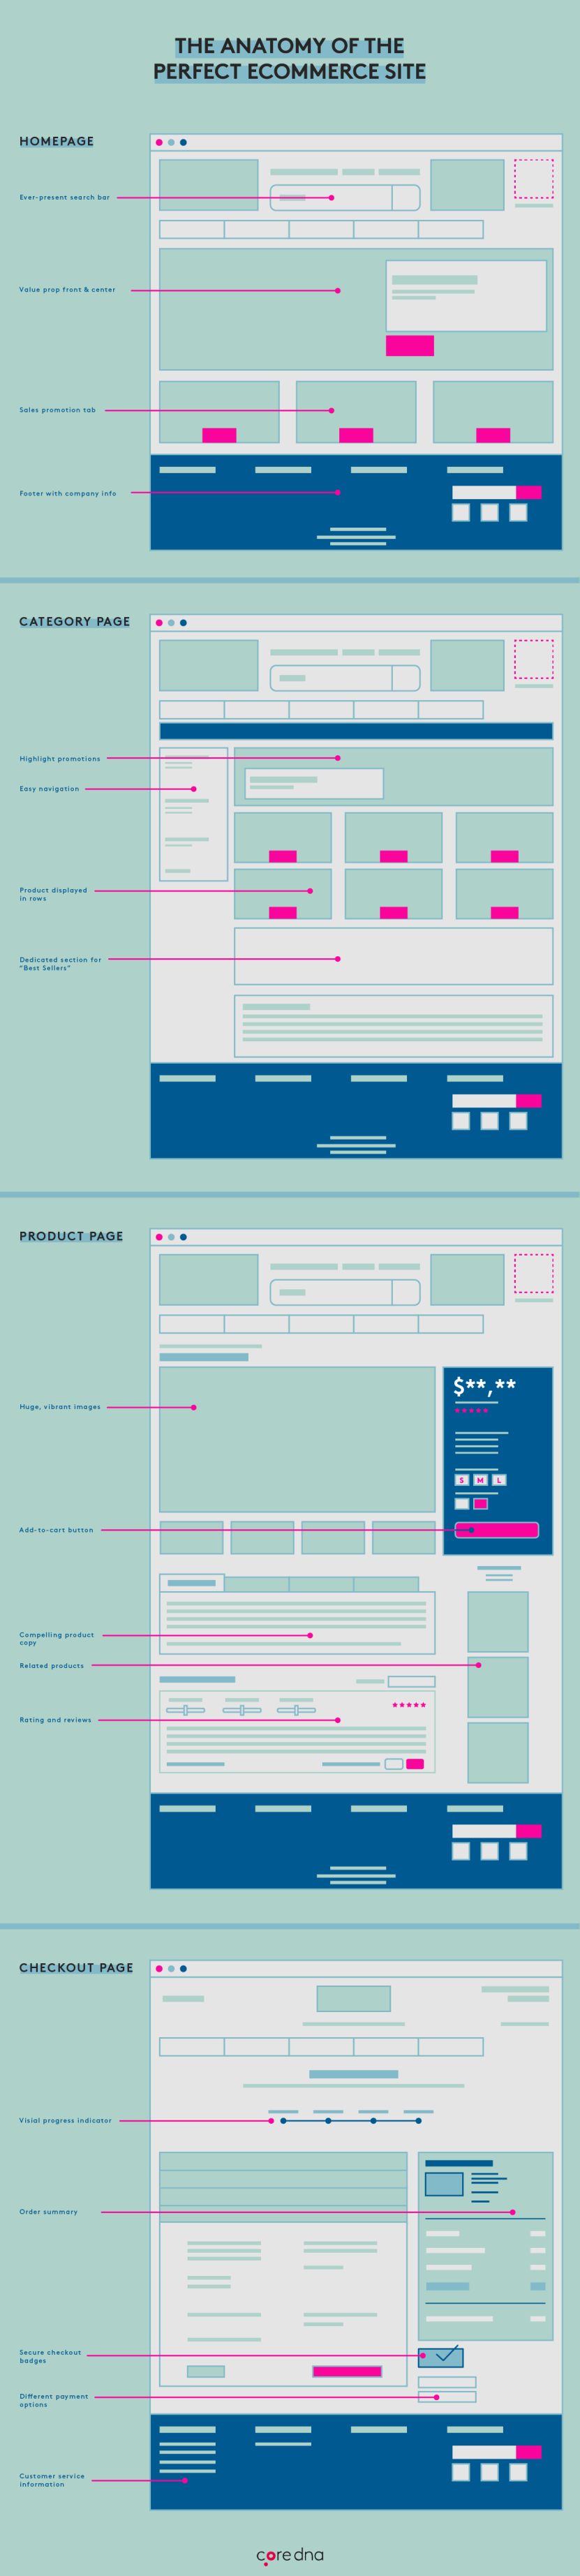 The anatomy of the perfect ecommerce site